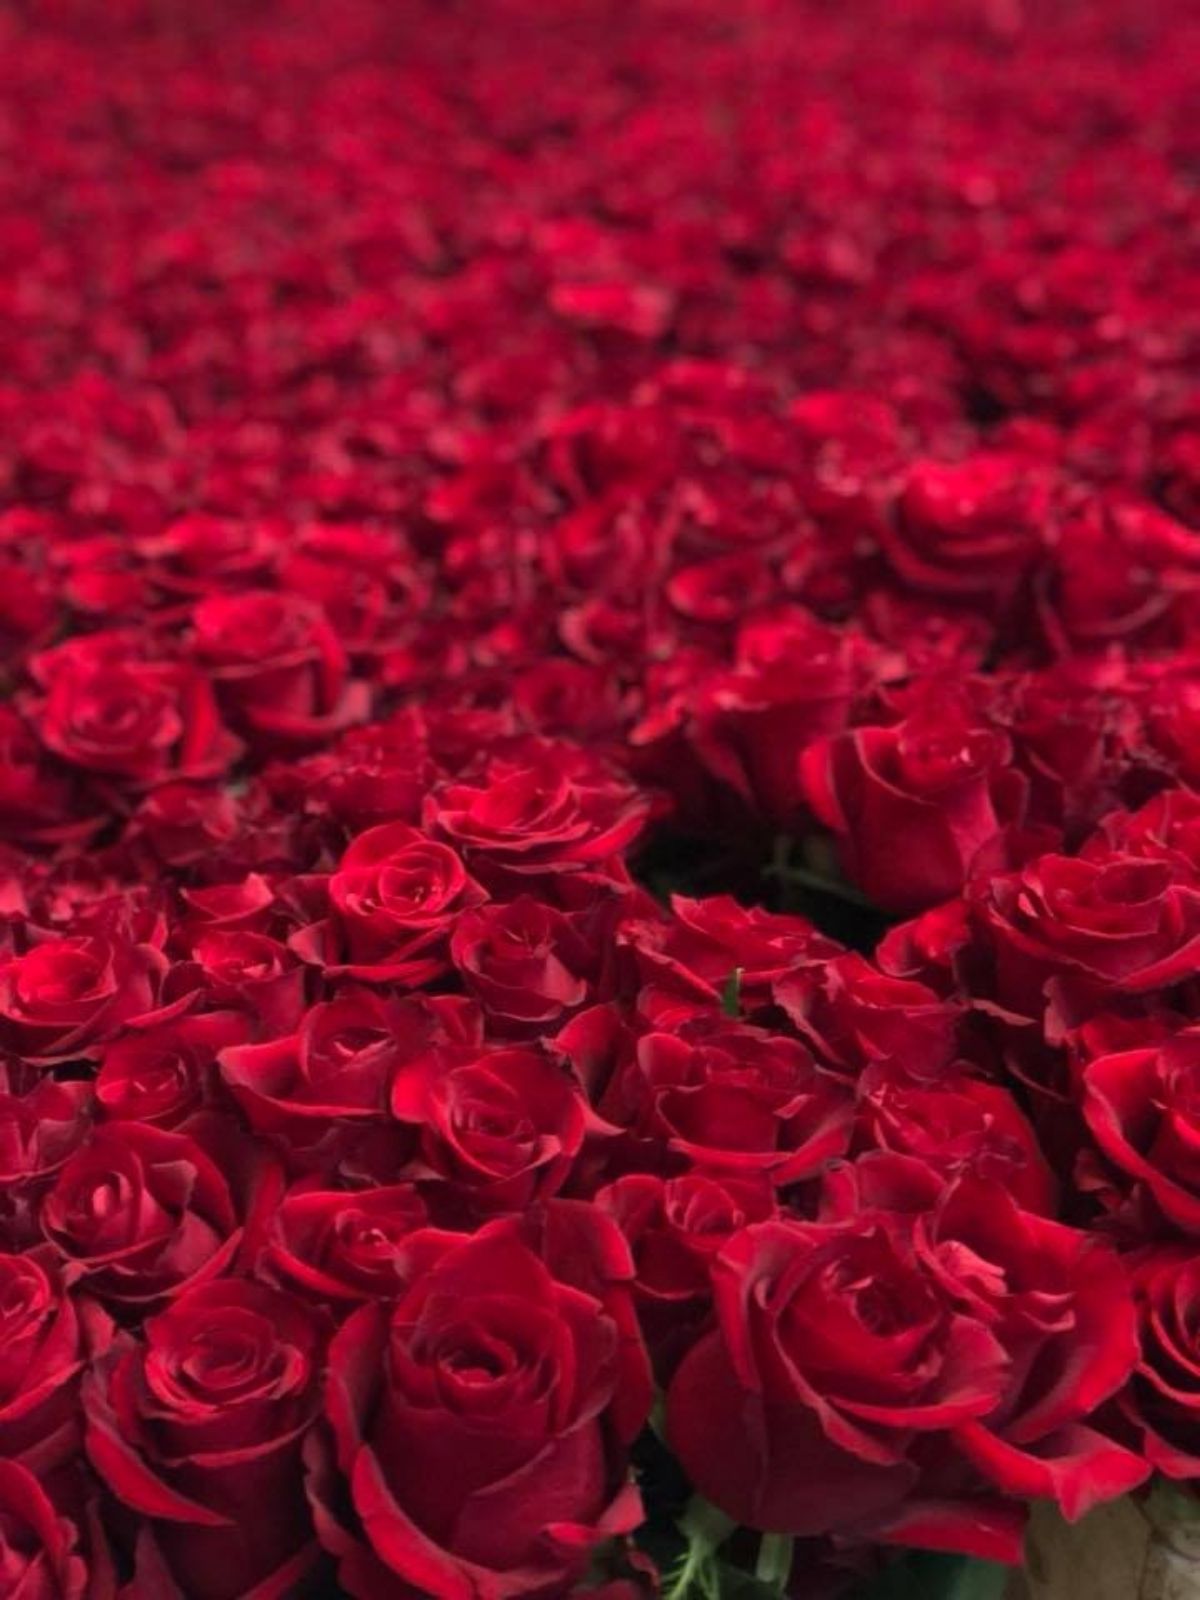 Ever Red roses are perfect for Valentine's Day